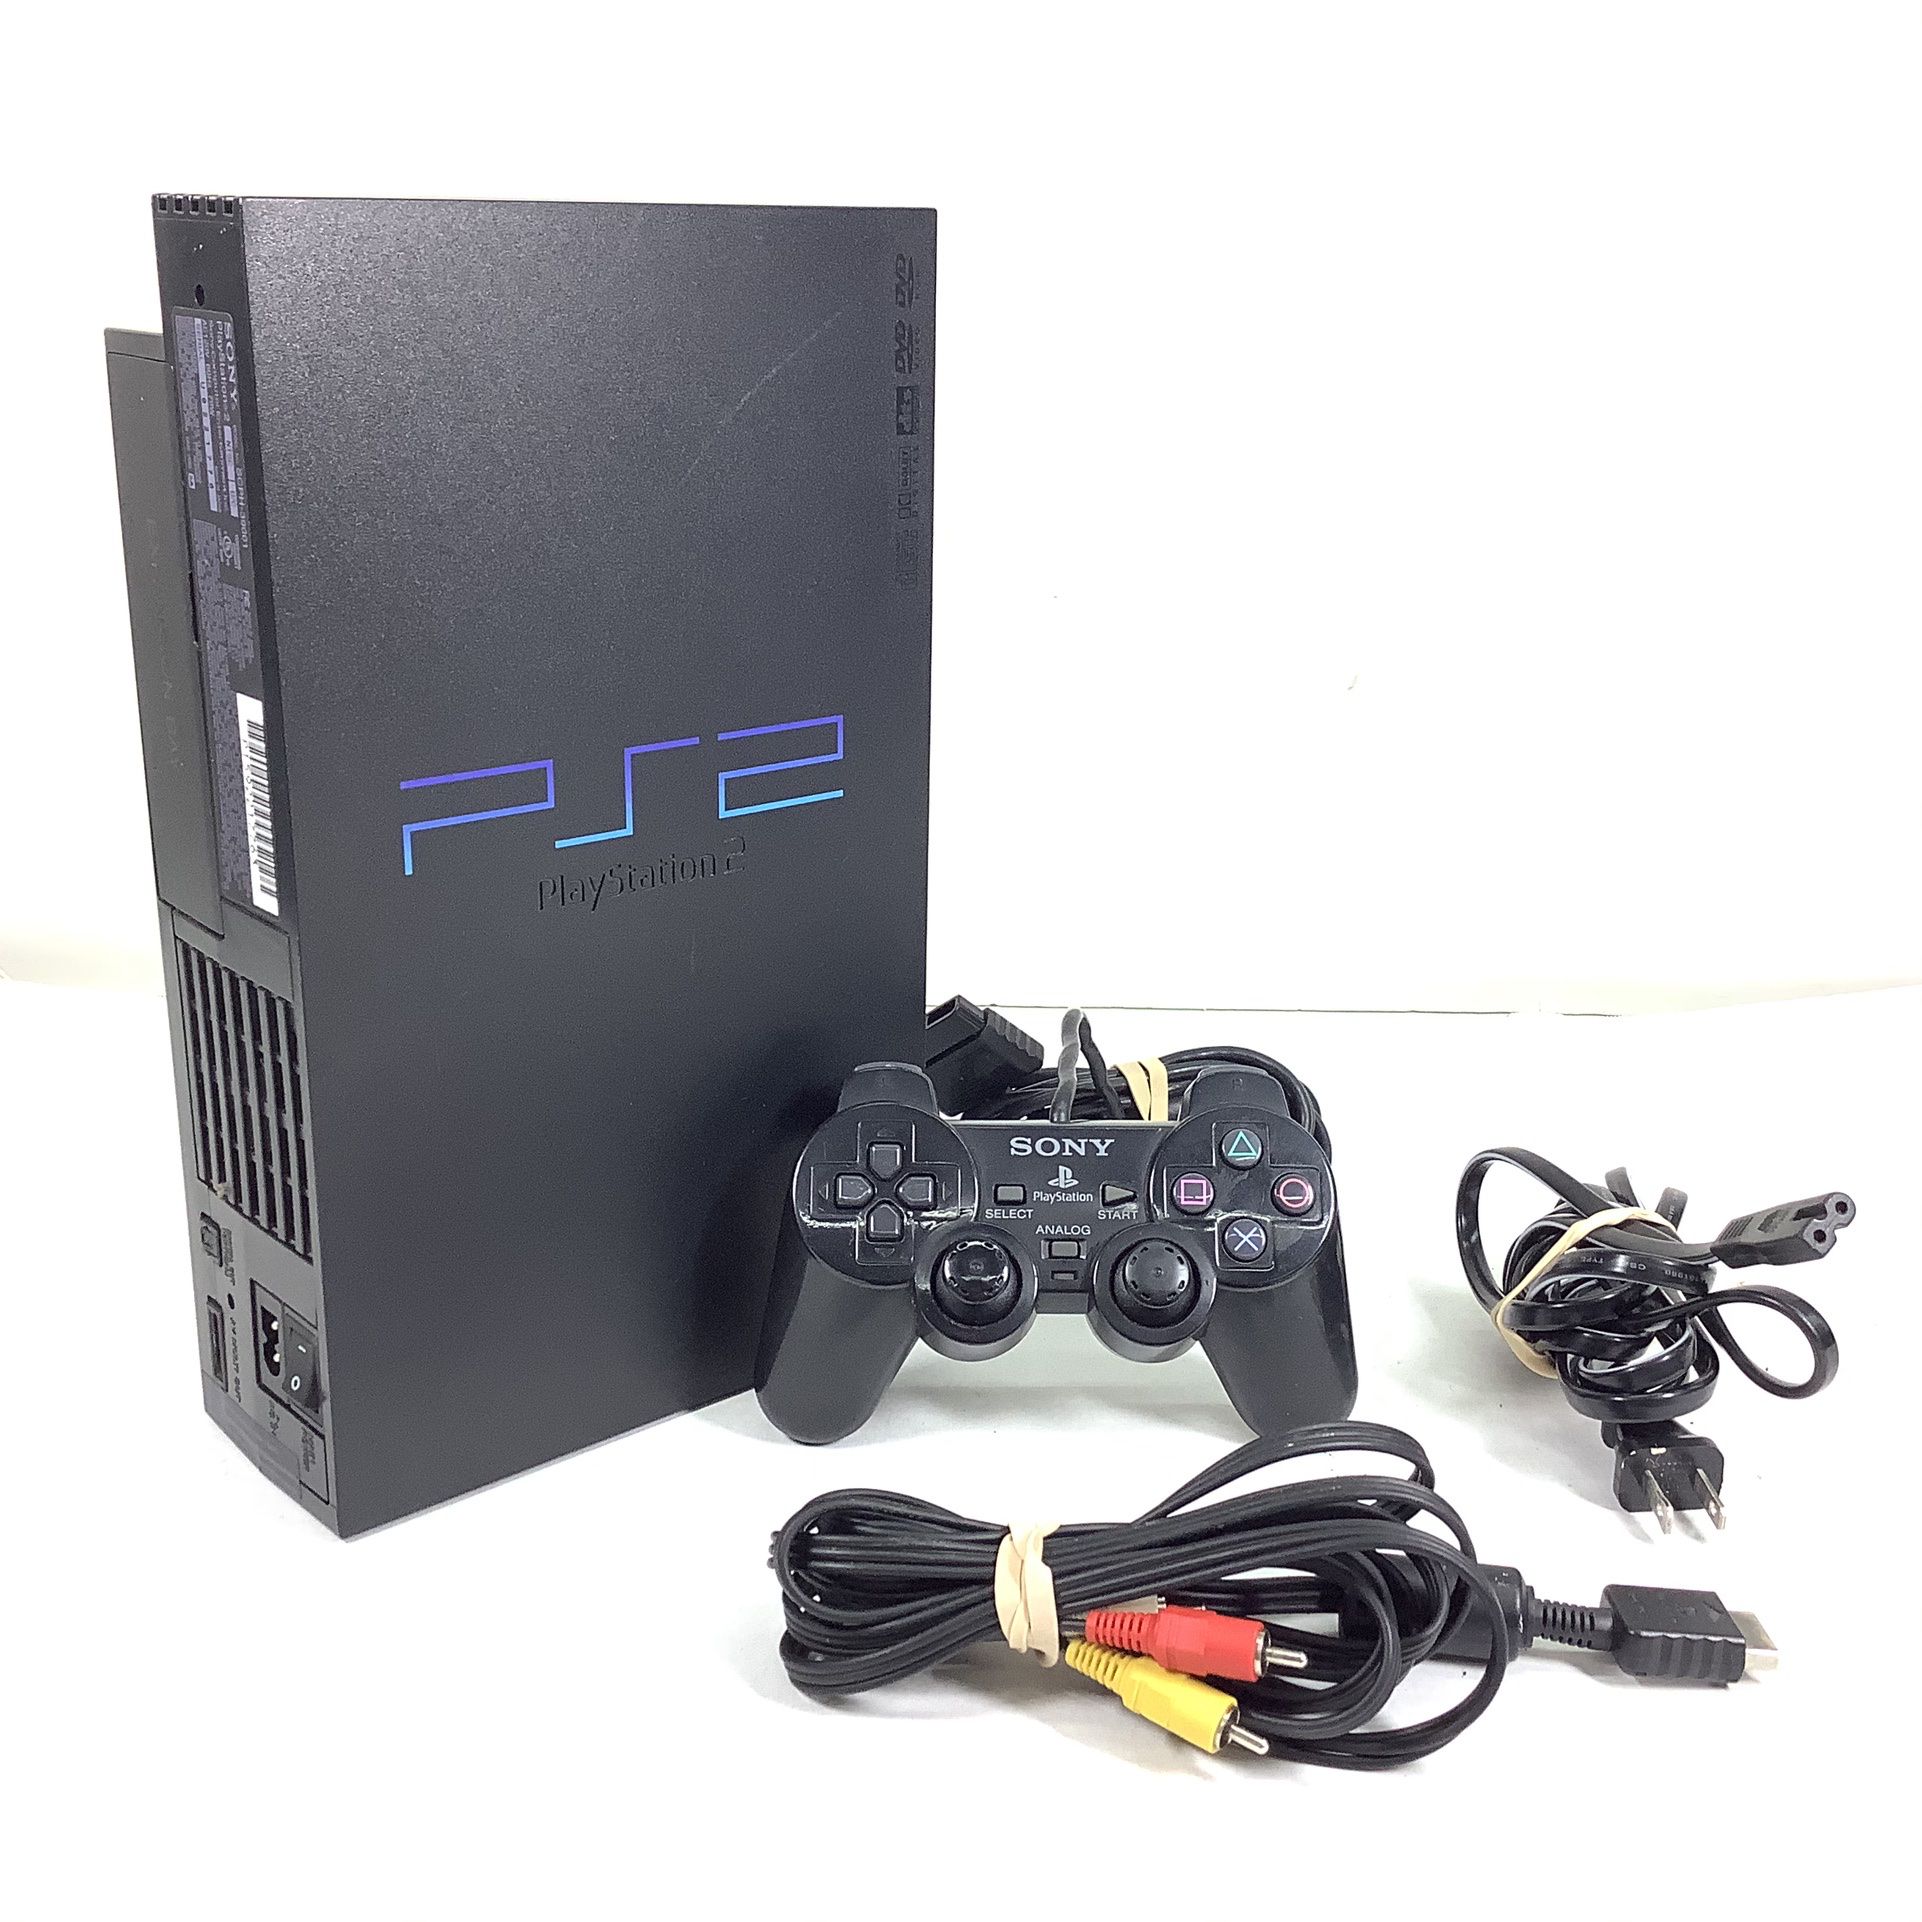 Sony PS2 / PlayStation 2 Video Game System Console